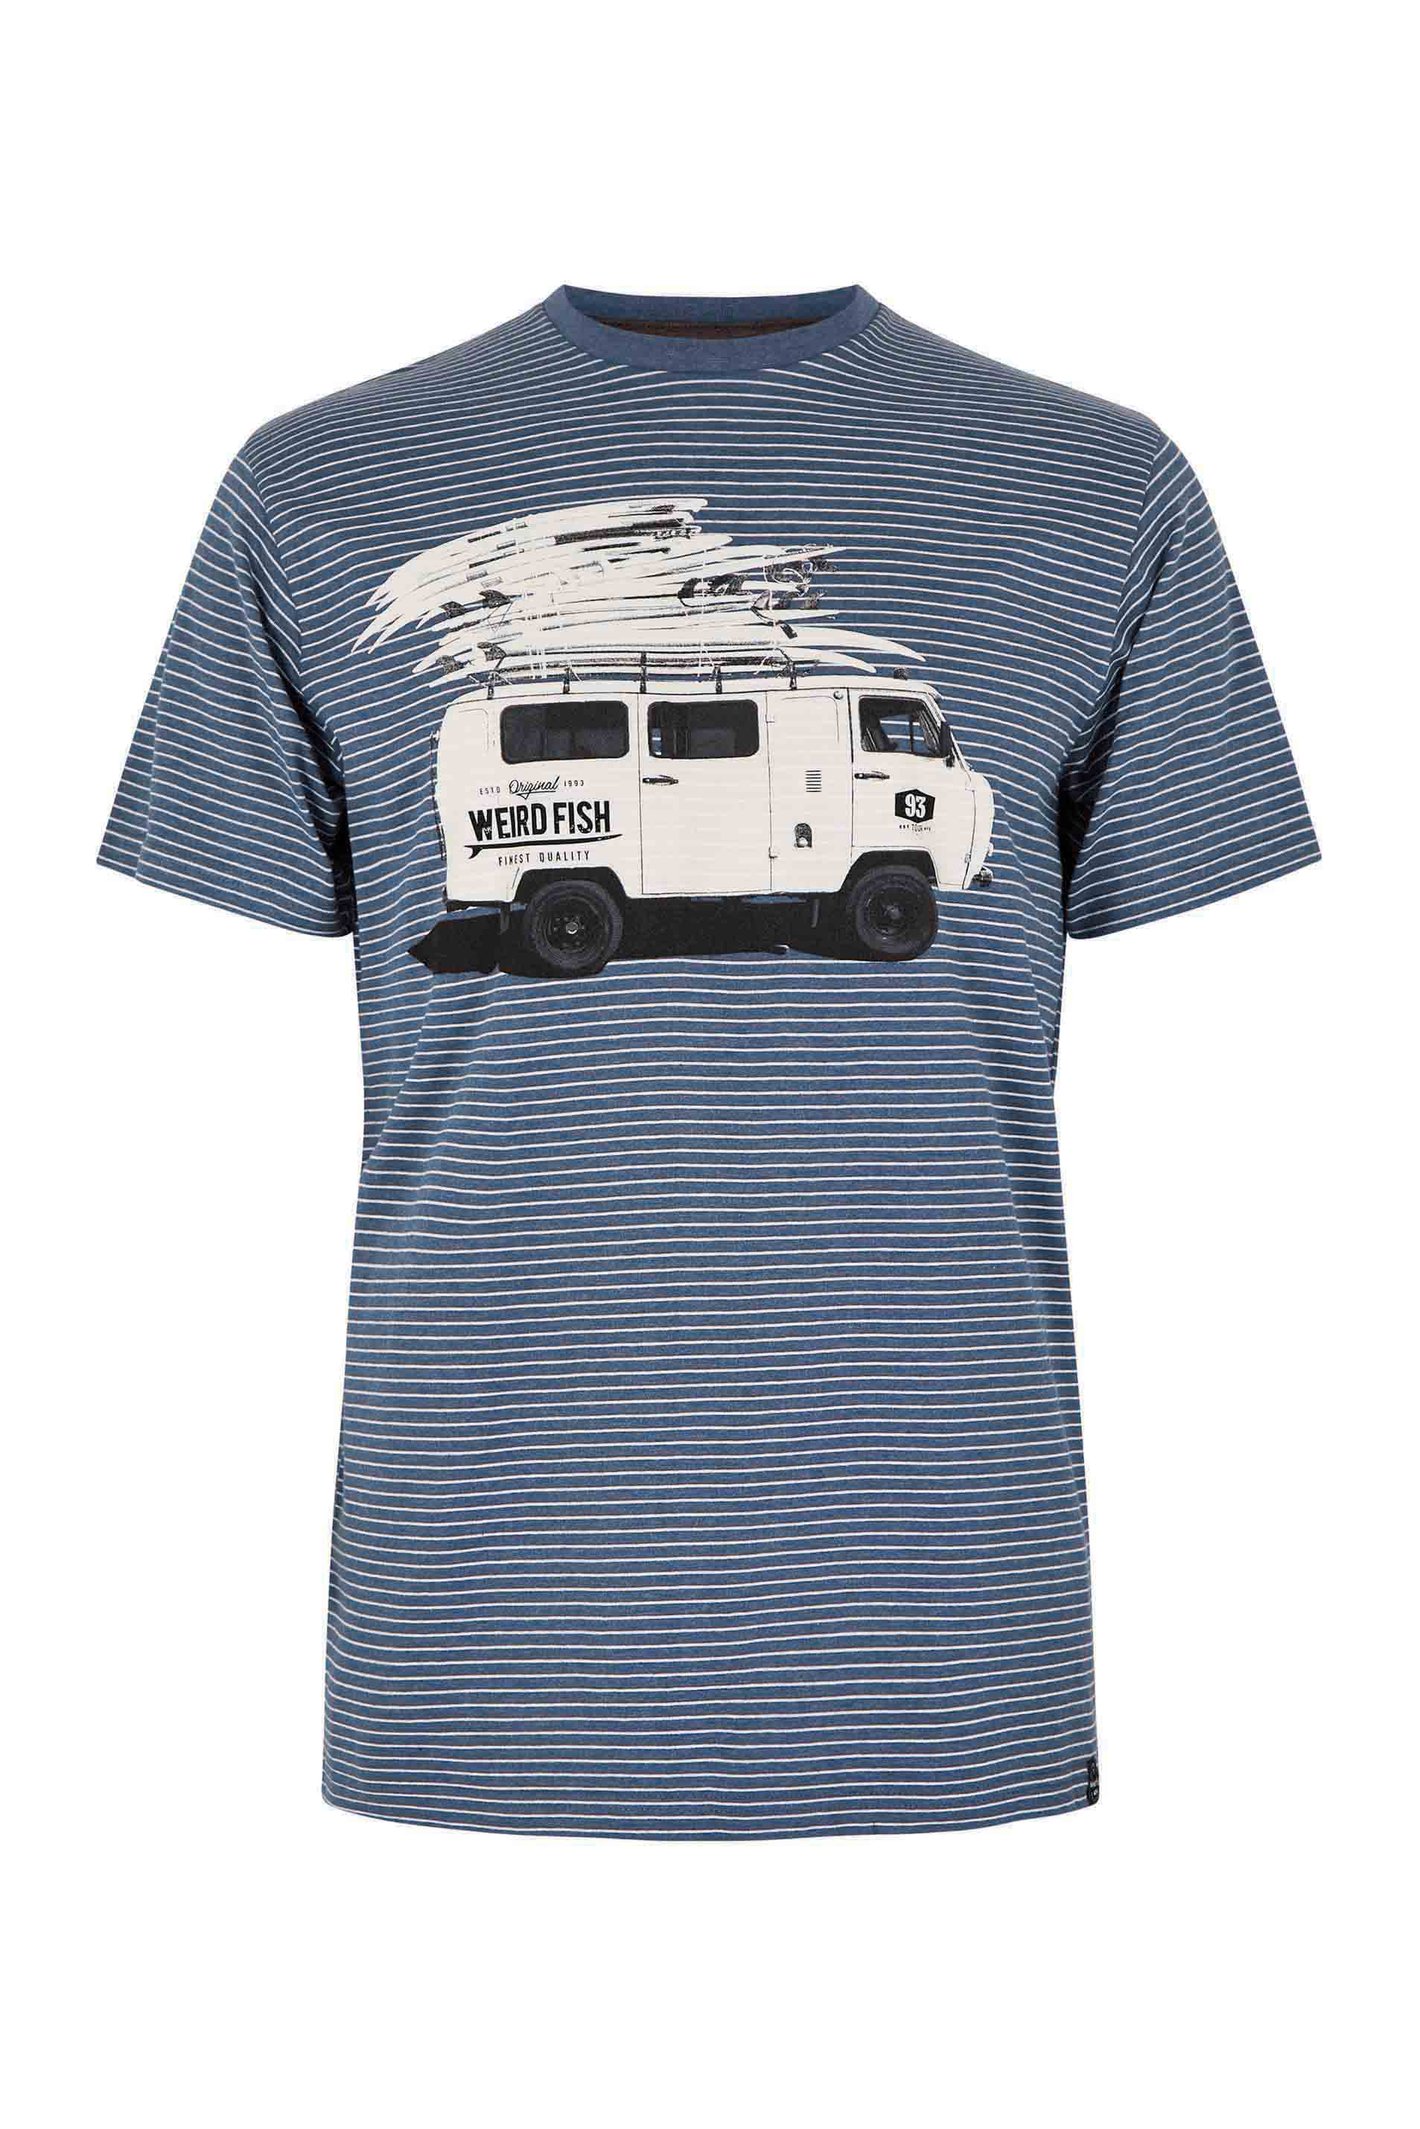 Weird Fish Road Trip Eco Graphic T-Shirt Ensign Blue Size 3XL